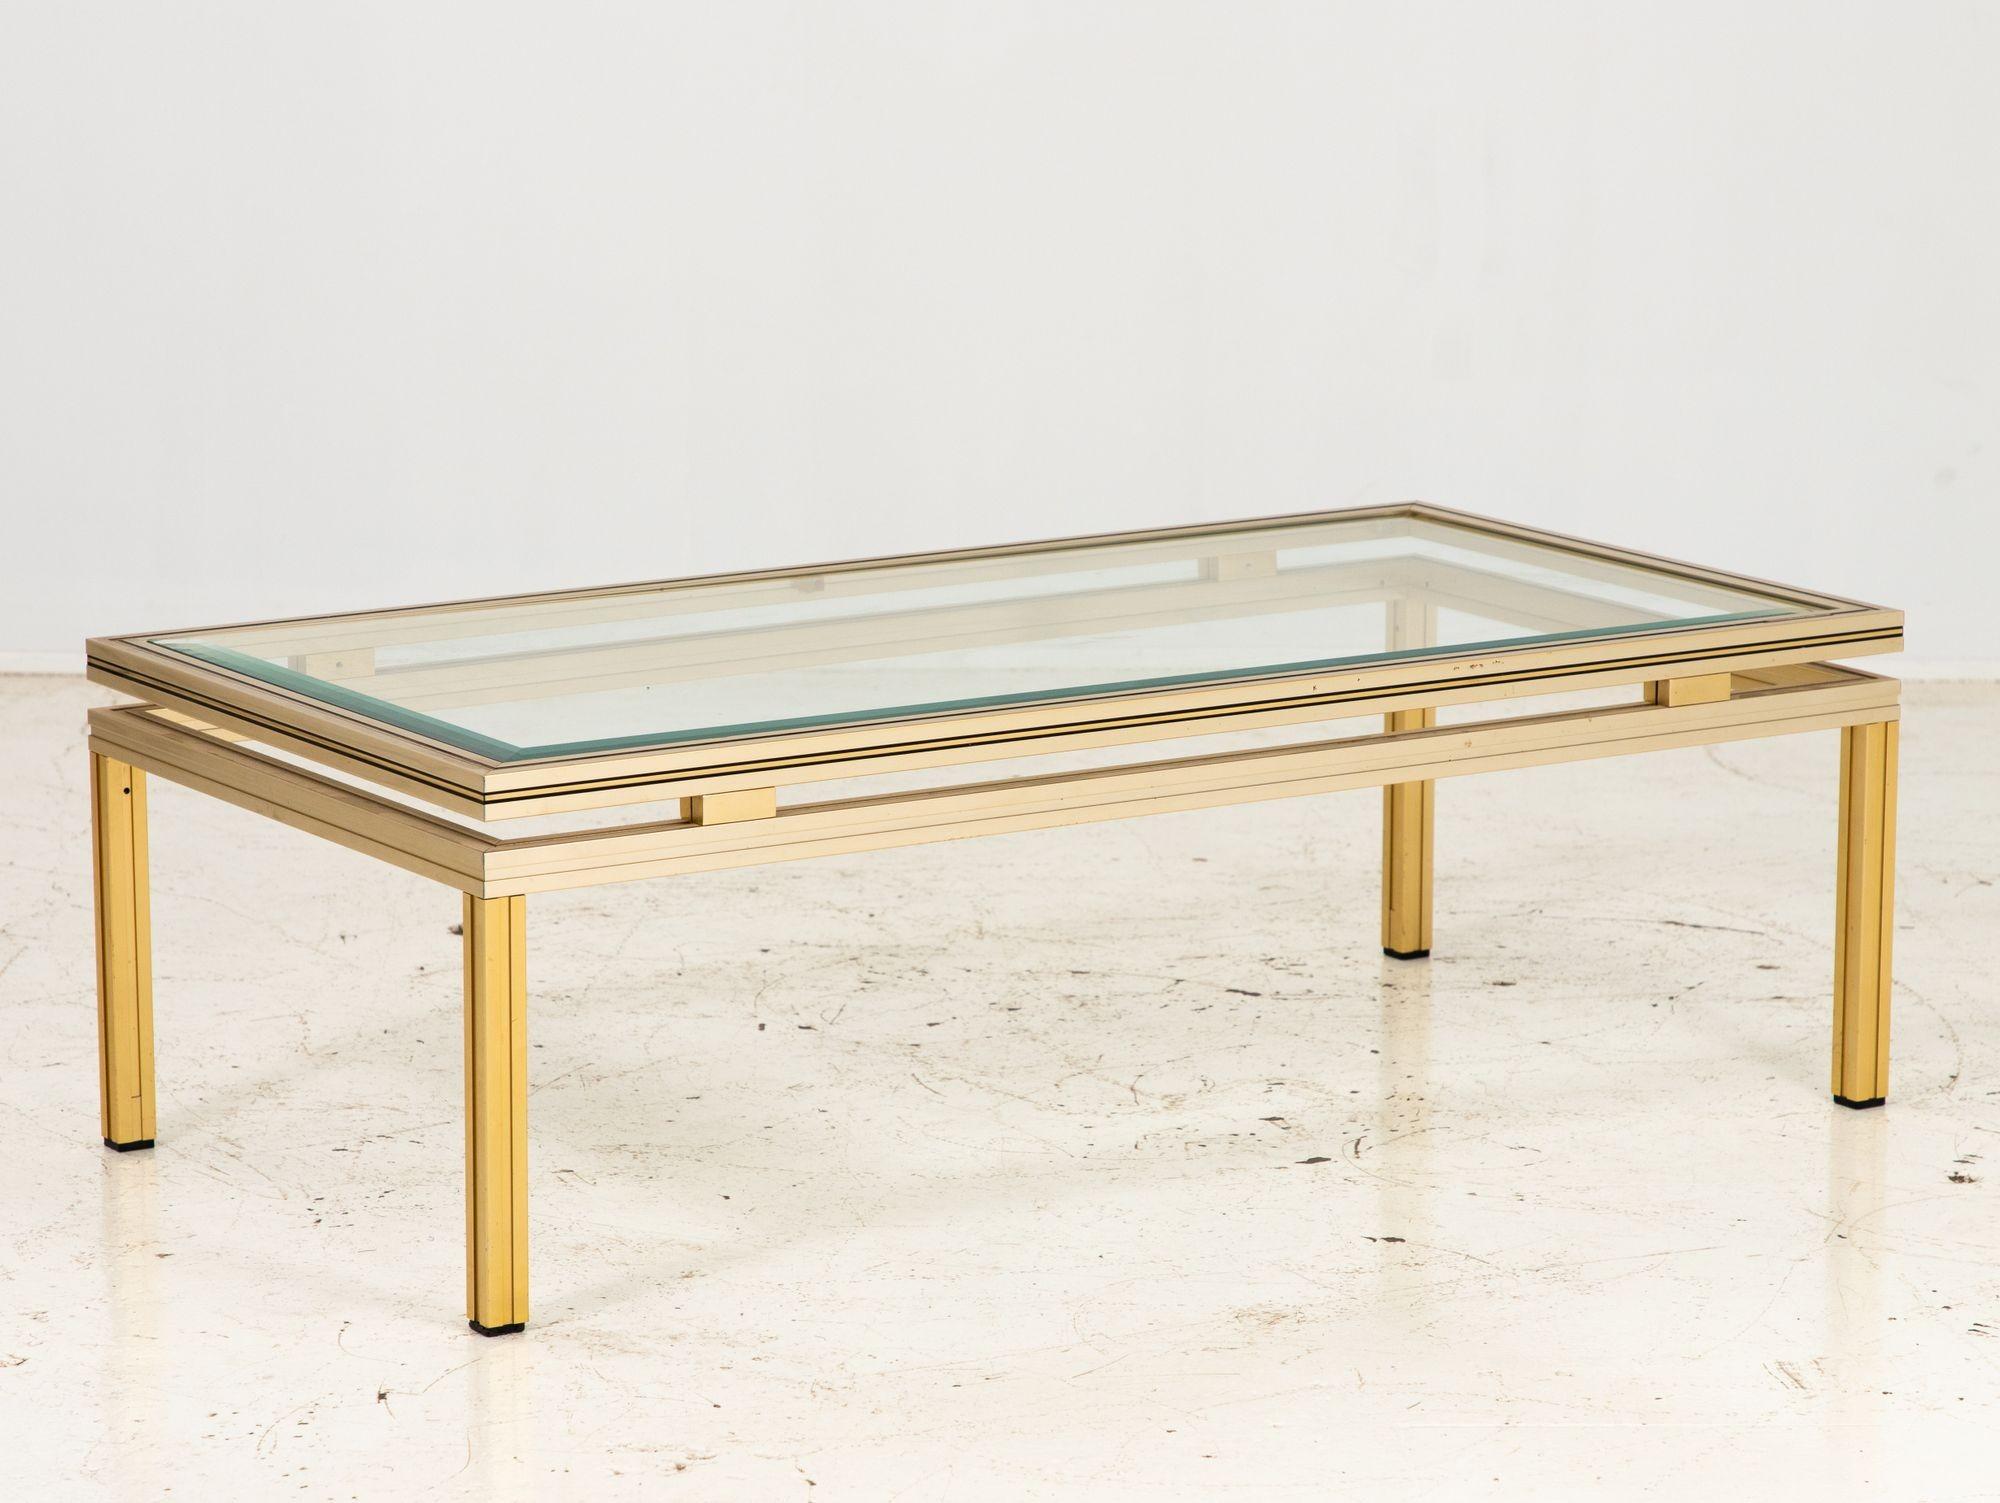 A 1970s Pierre Vandel style brass and stainless steel coffee table. A rectangular French cocktail or coffee table with four square legs and a beveled glass top. Wear consistent with age and use.